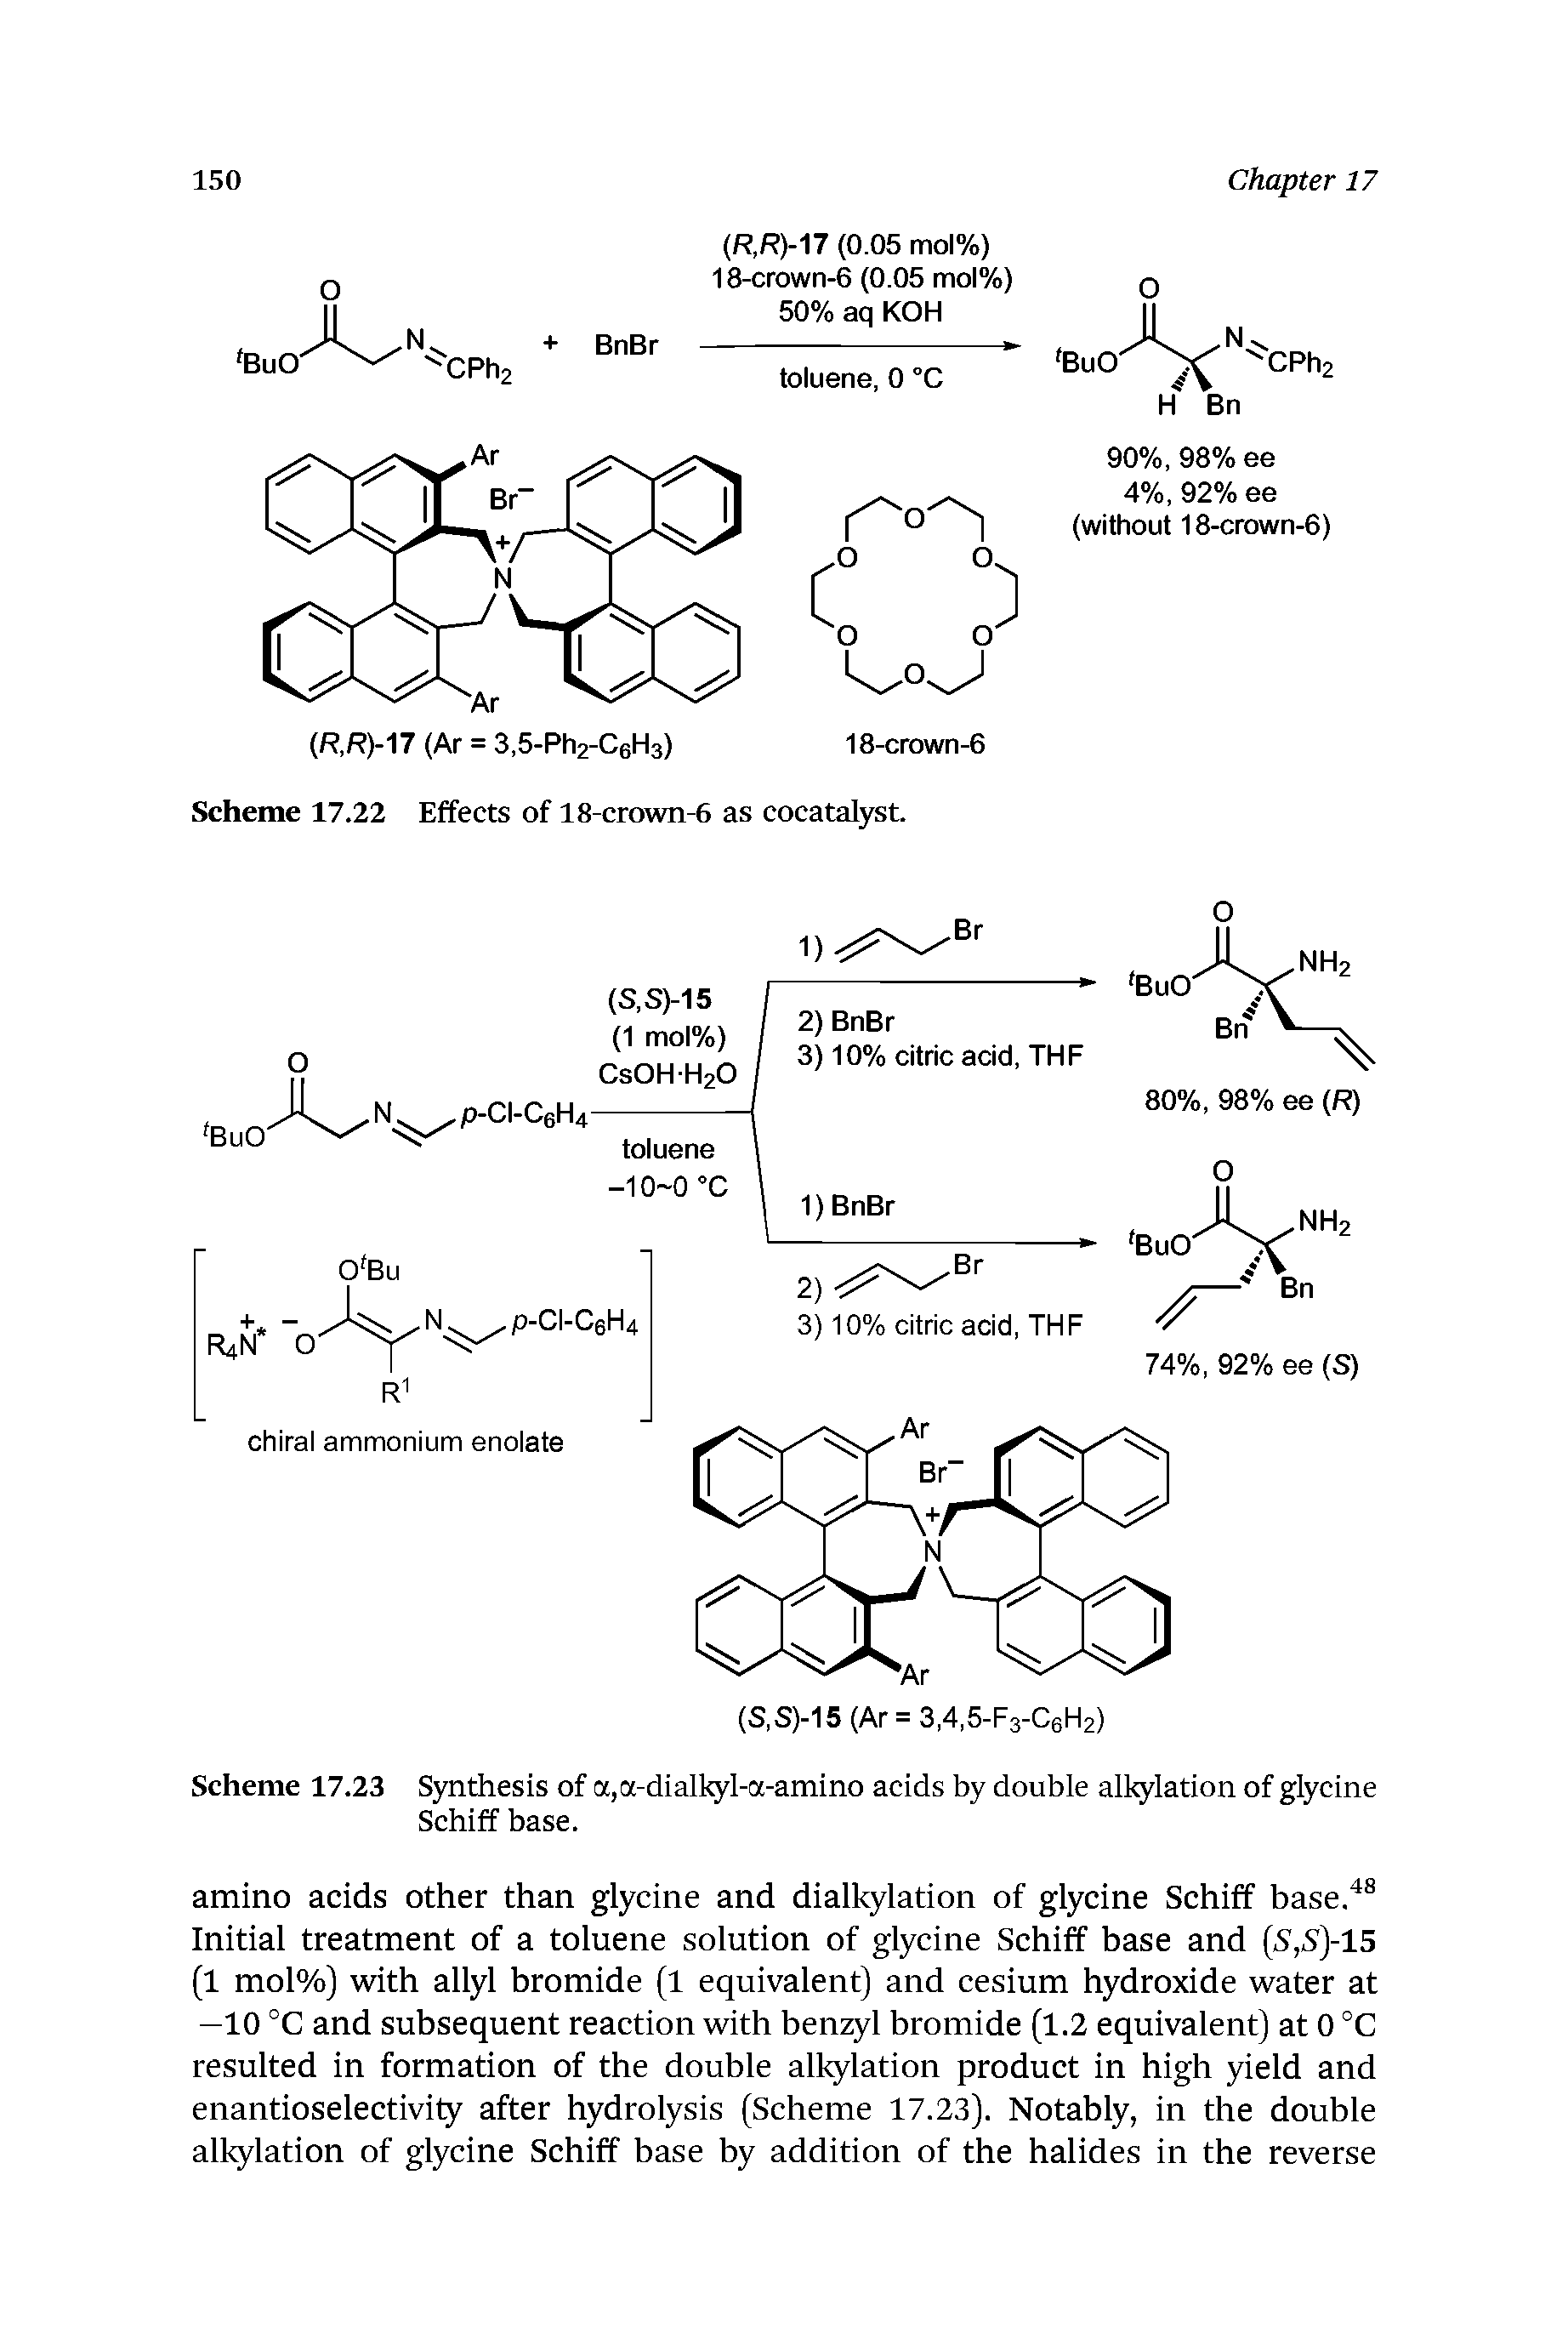 Scheme 17.23 Synthesis of a,a-dialkyl-a-amino acids by double alkylation of glycine Schiff base.